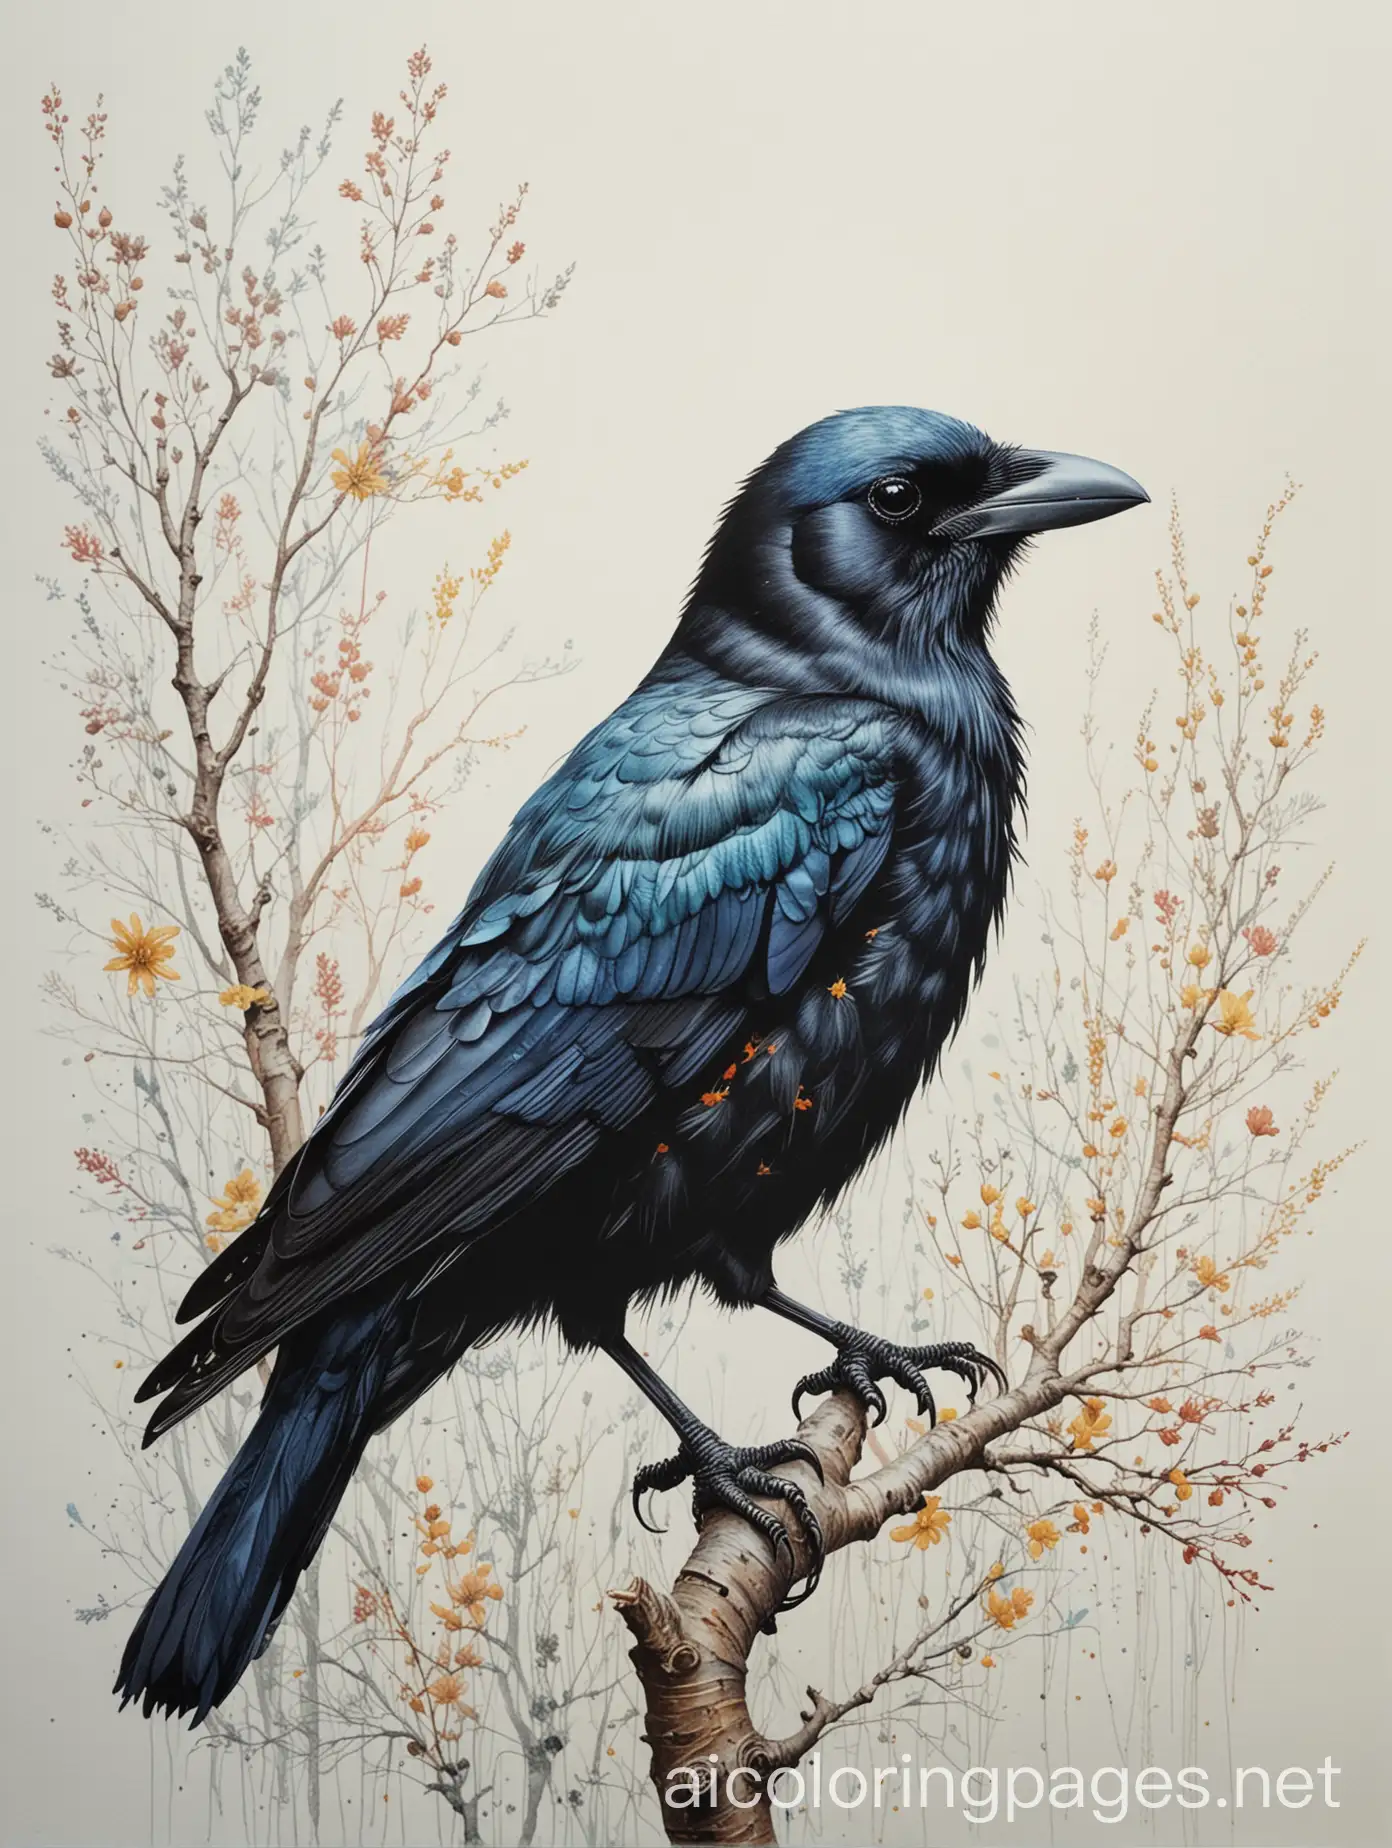 Beautiful-Crow-Coloring-Page-with-Soft-Colors-and-Intricate-Details